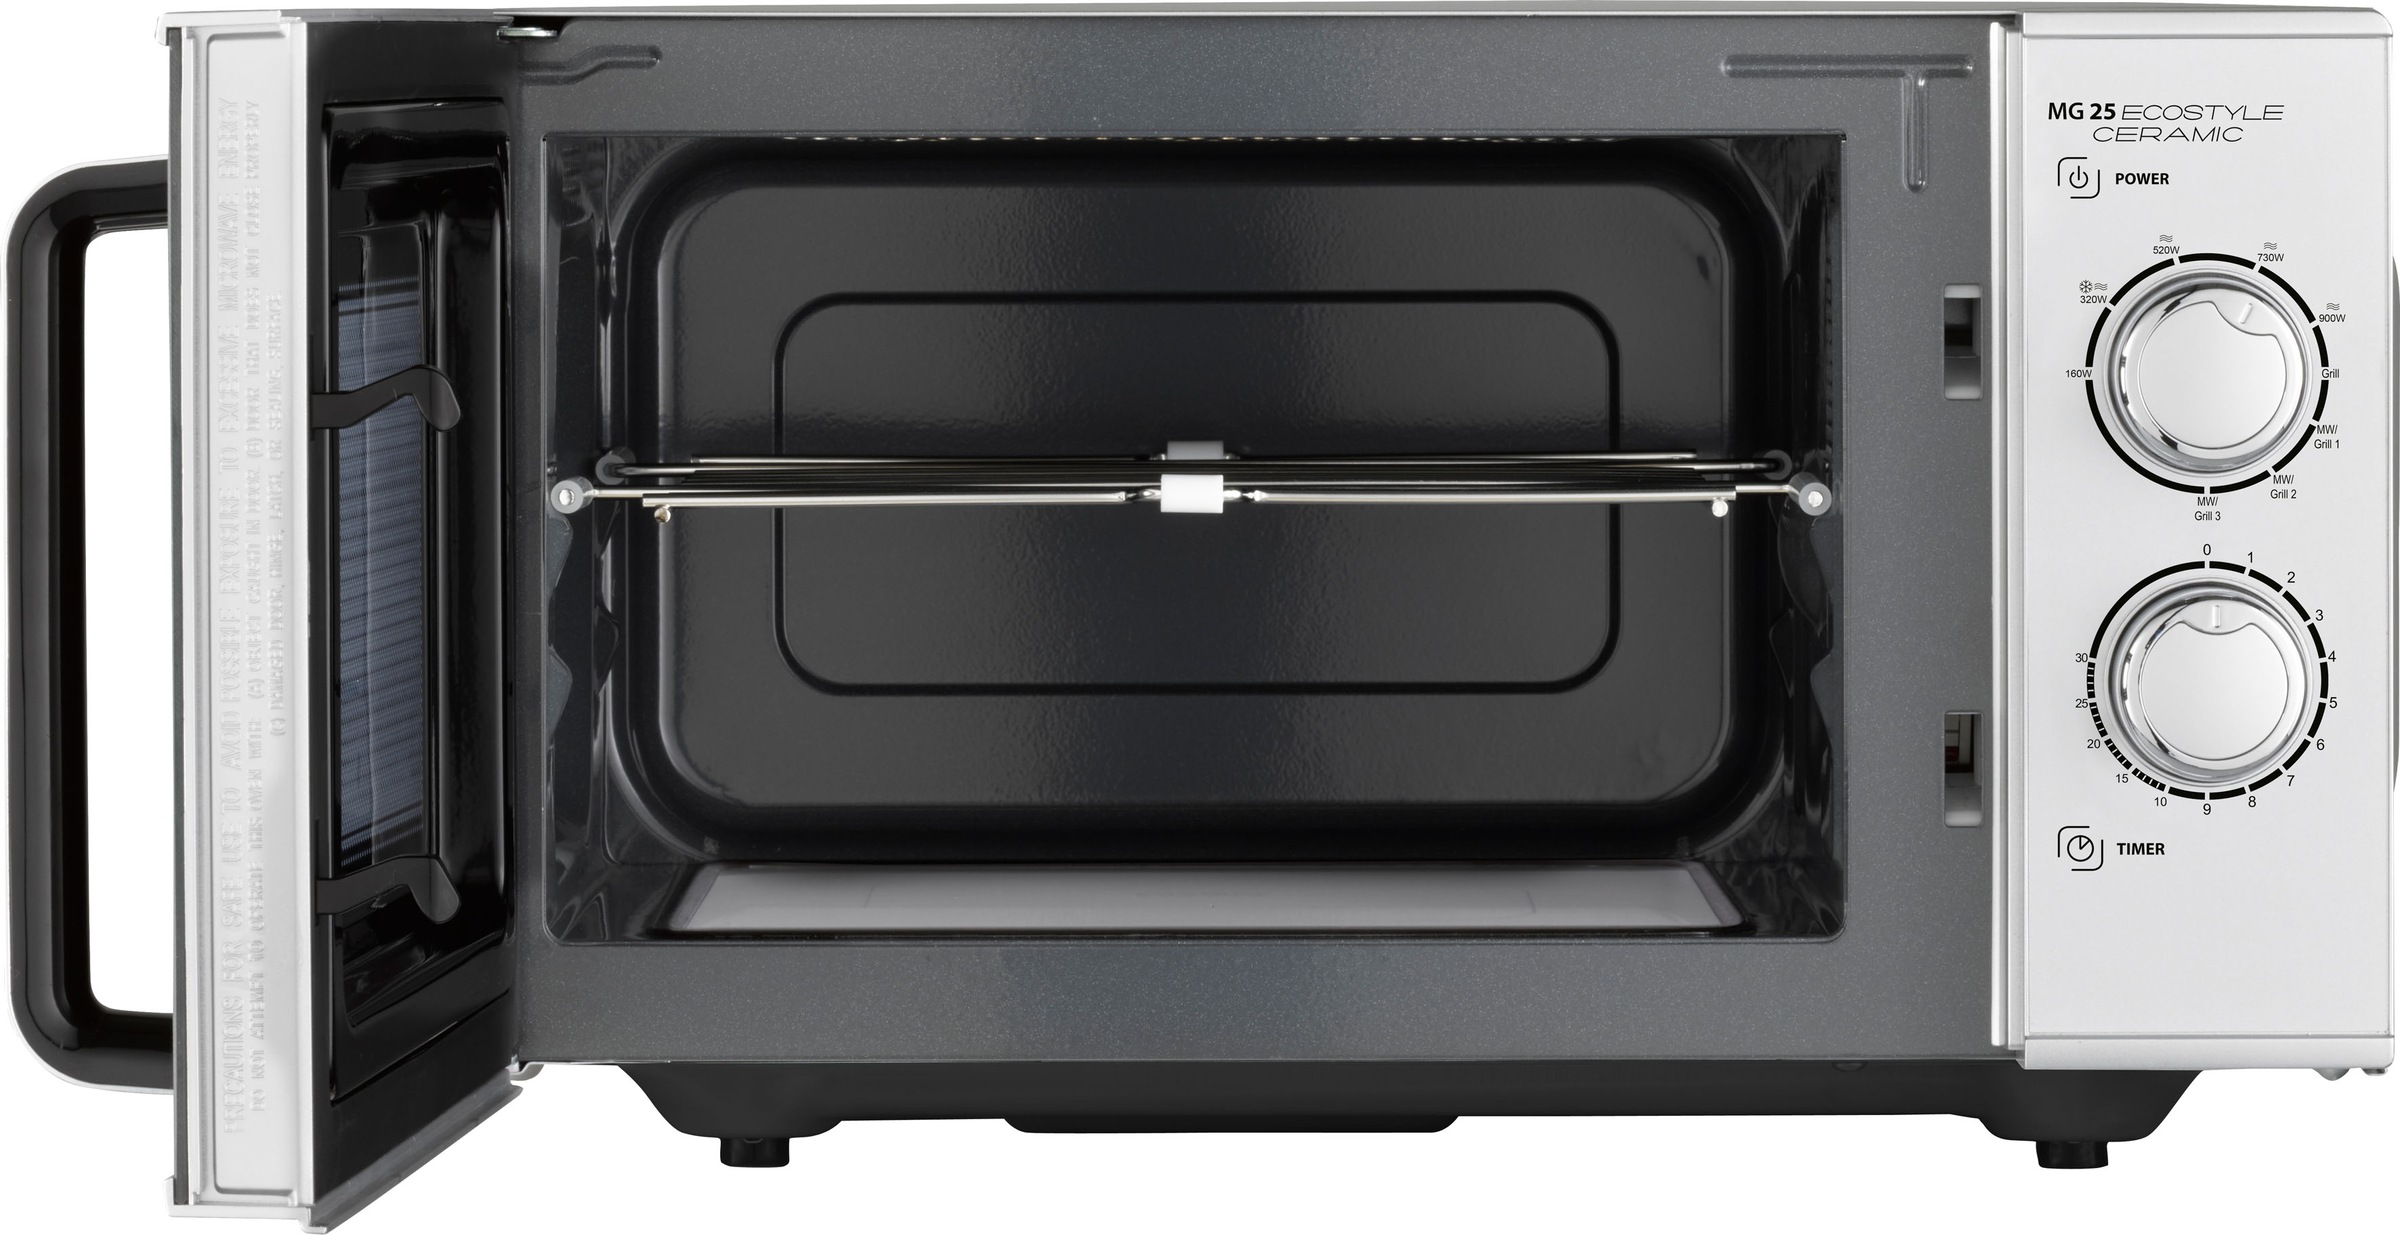 Caso Mikrowelle »3329 MG 25 Ecostyle Ceramic«, Mikrowelle-Grill, 1200 W